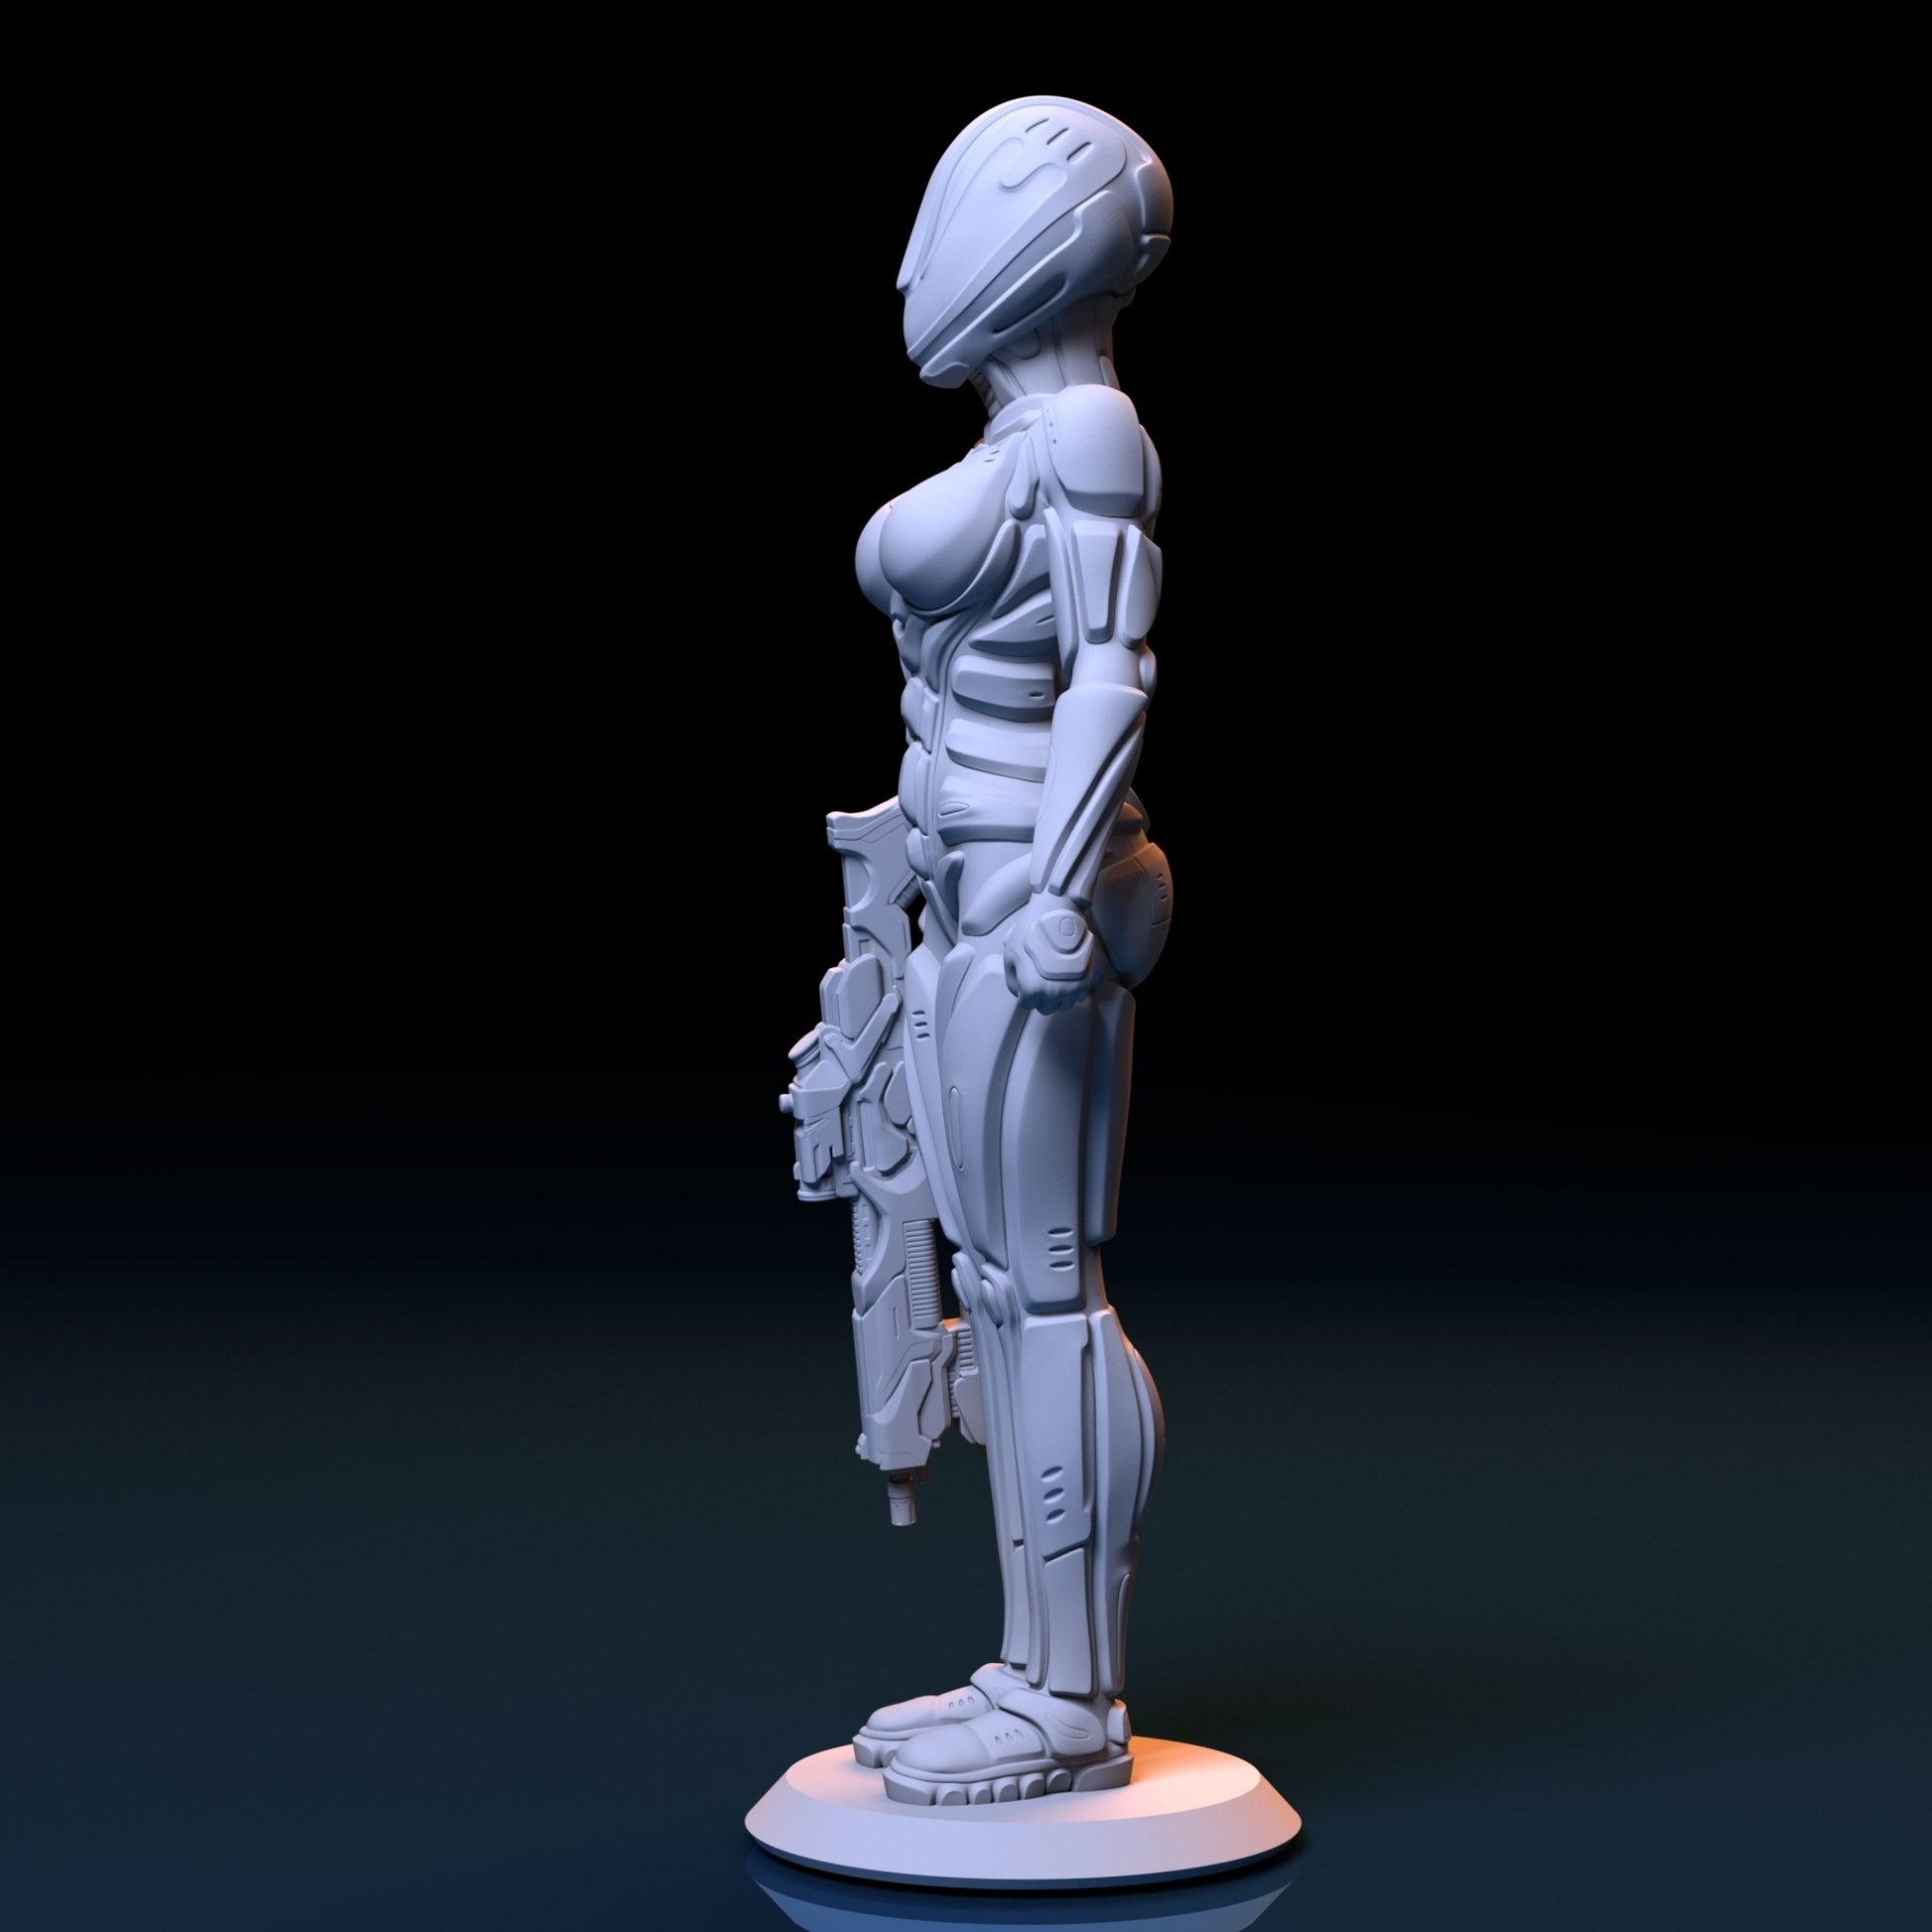 Space Force Girl 3D Printed Figurine Fanart Unpainted Scale Models